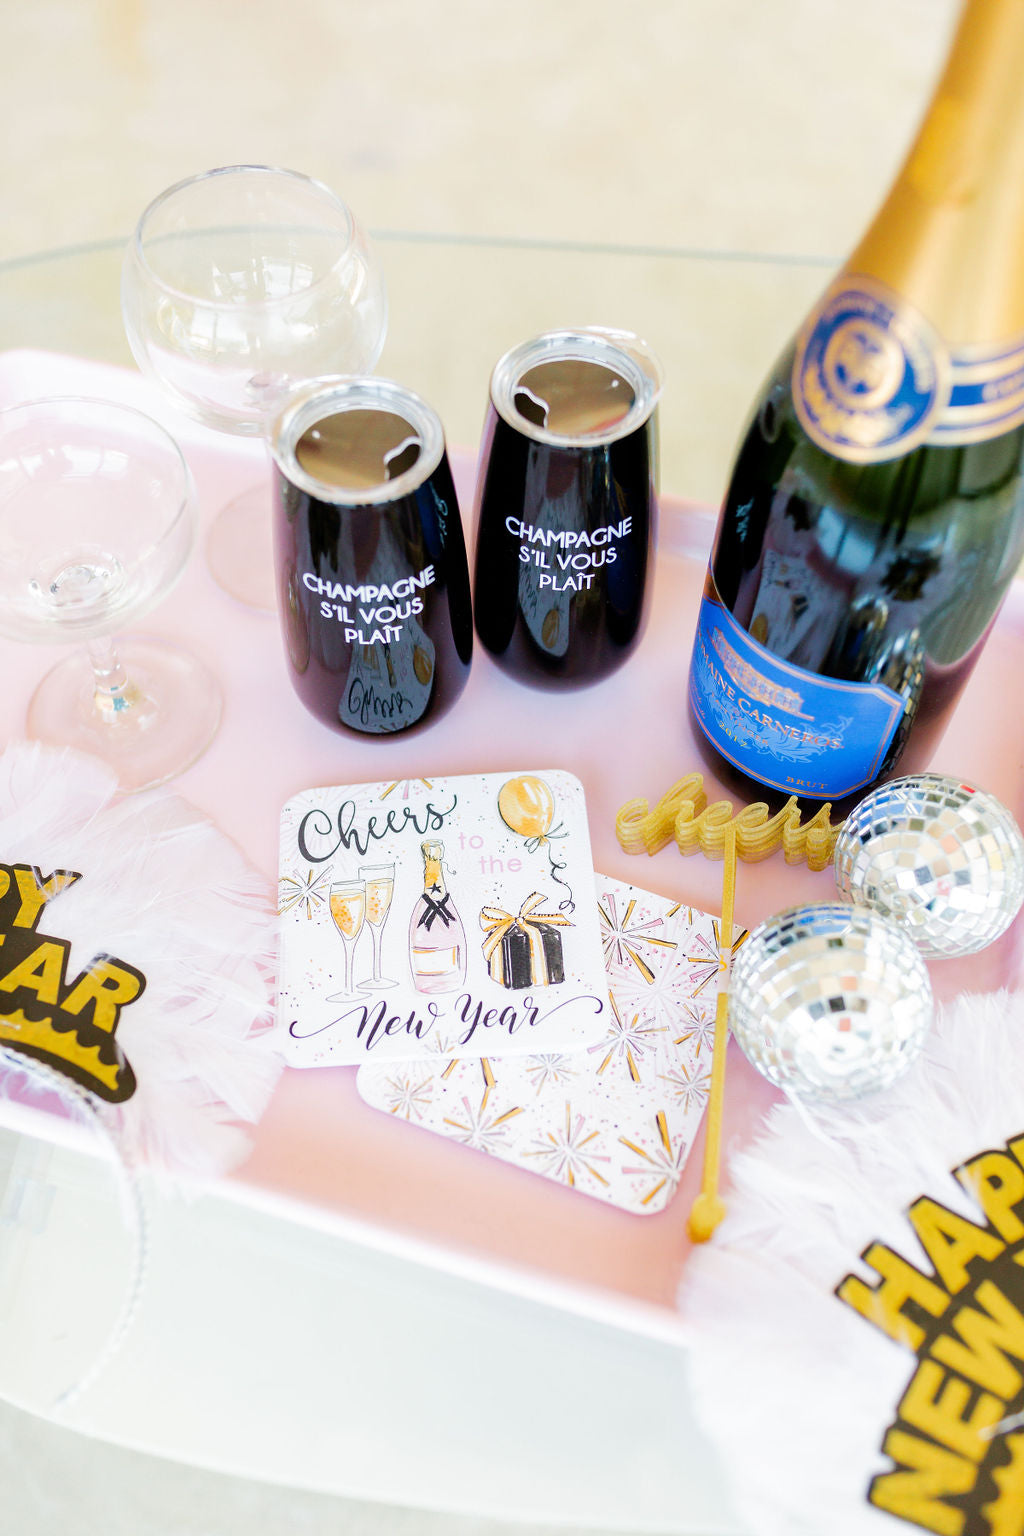 'Cheers To The New Year' Paper Coasters